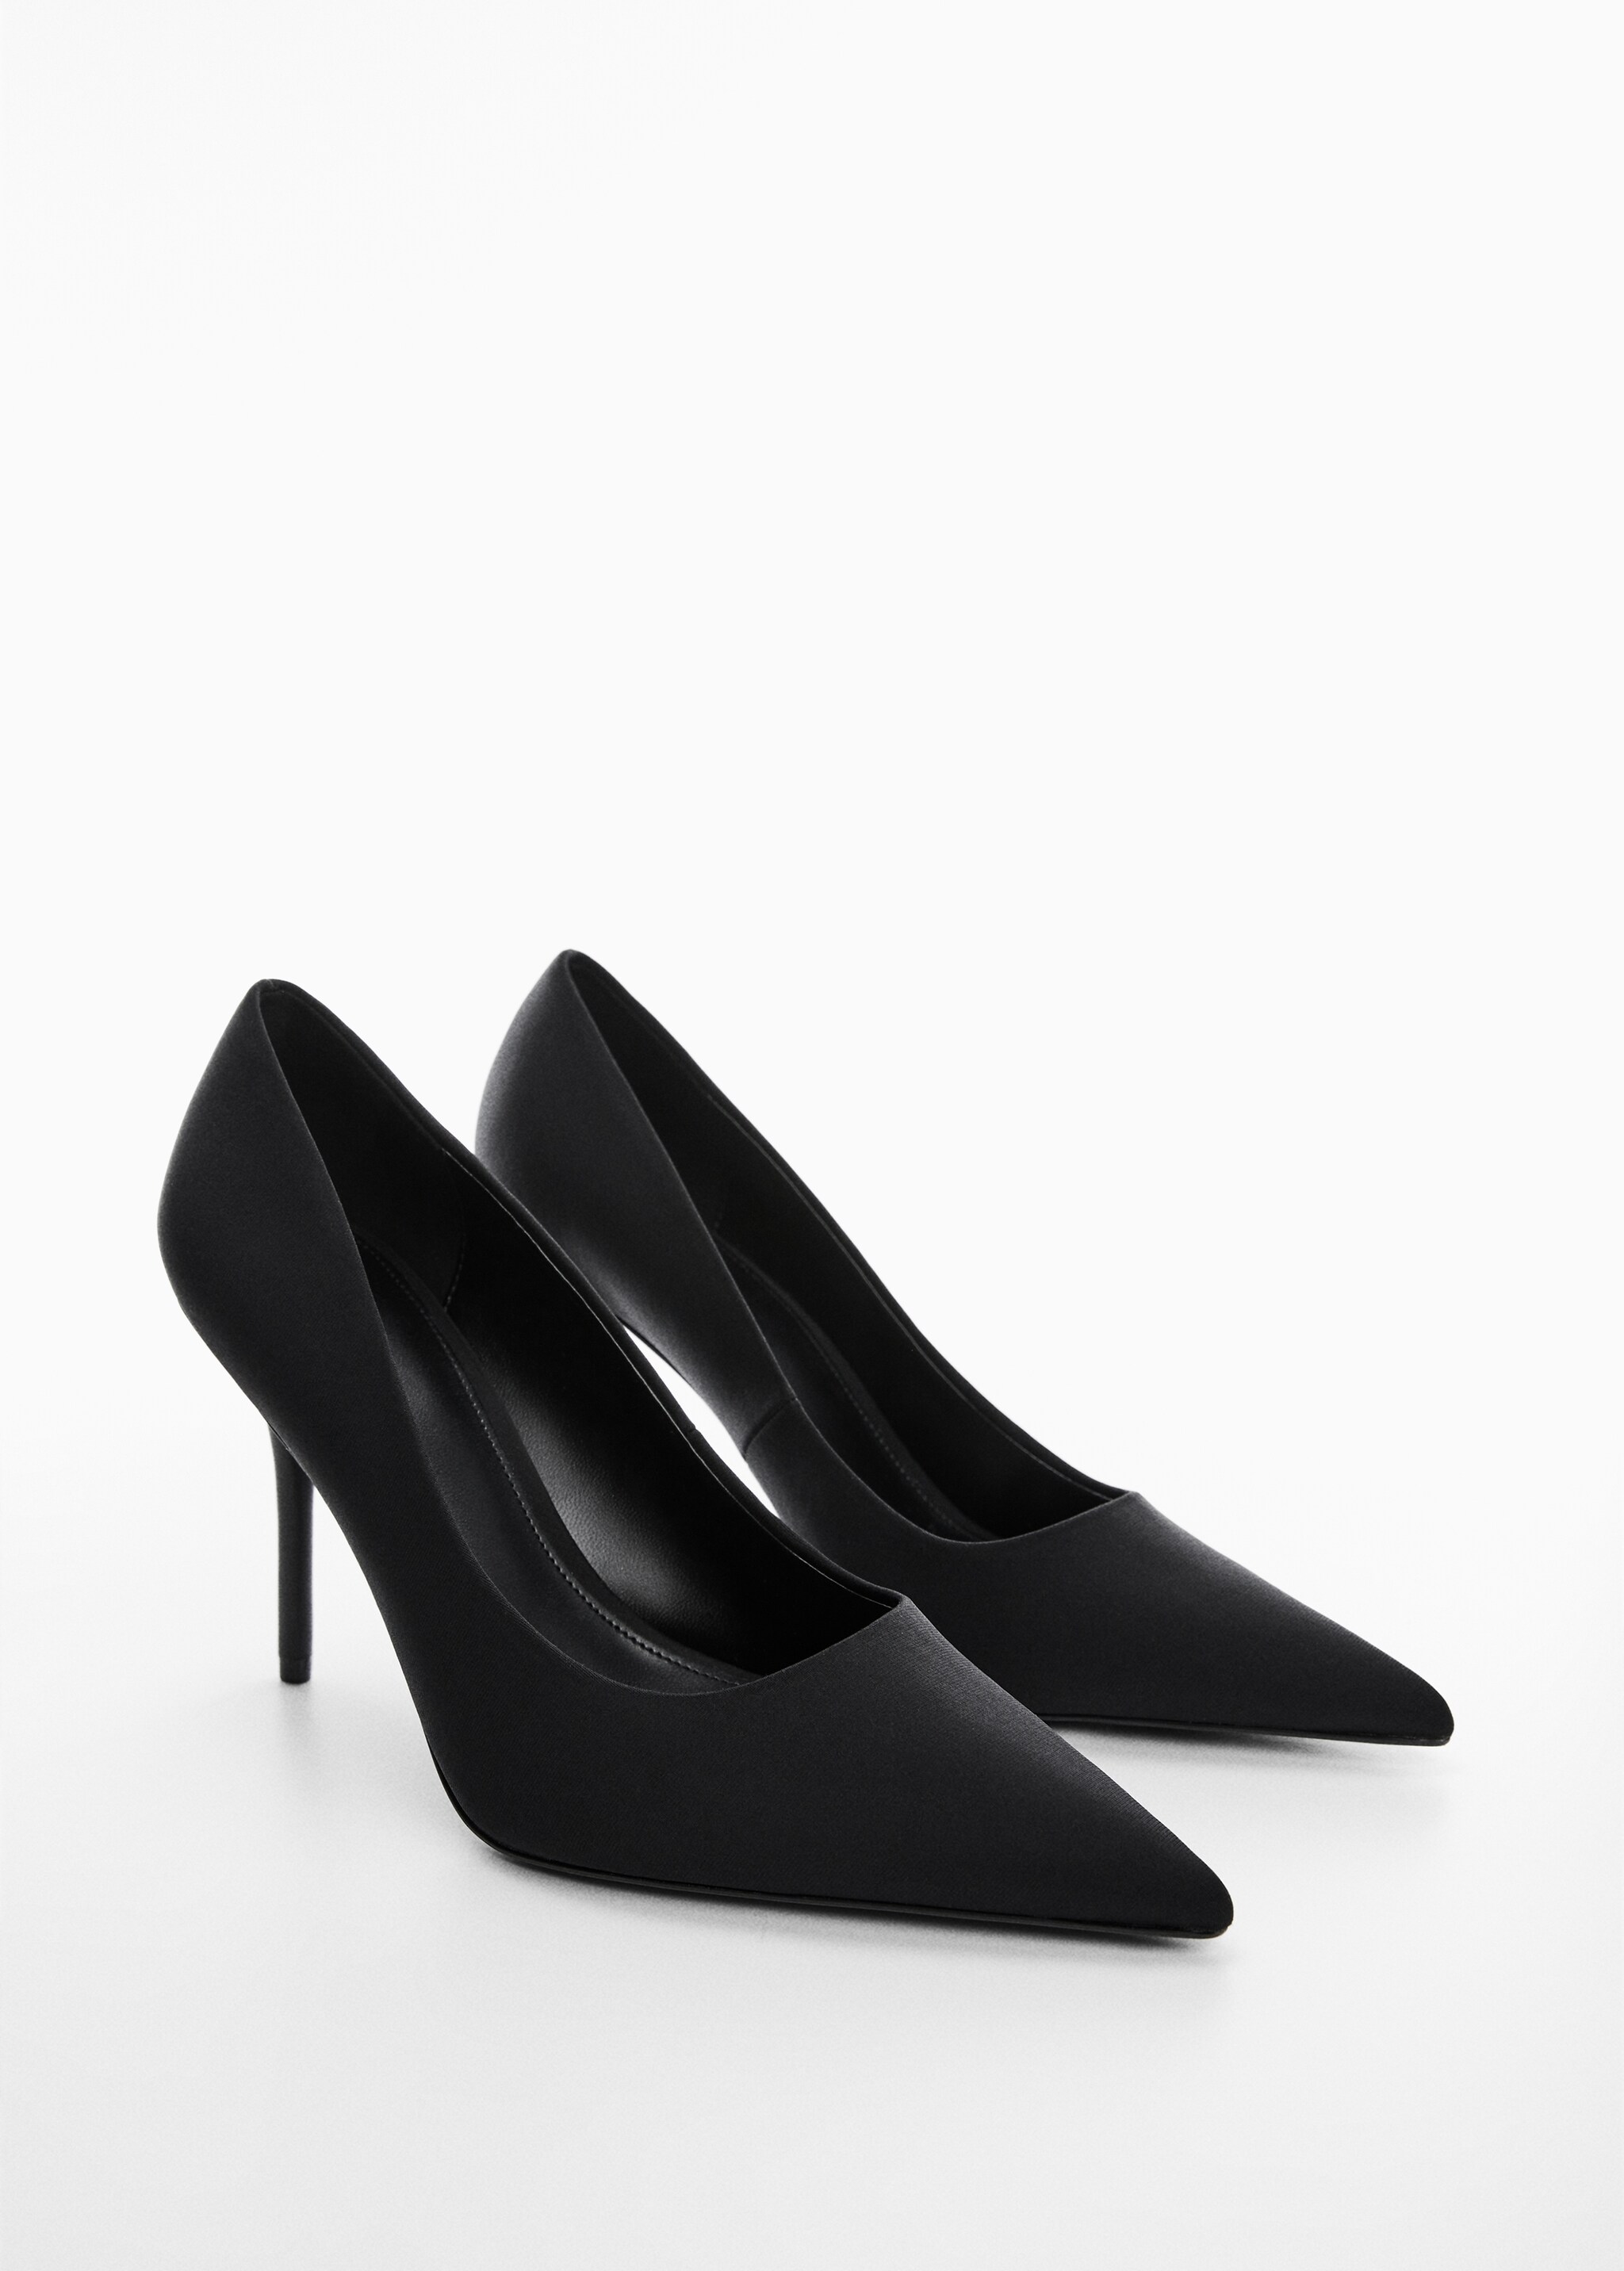 Pointed toe heel shoes - General plane